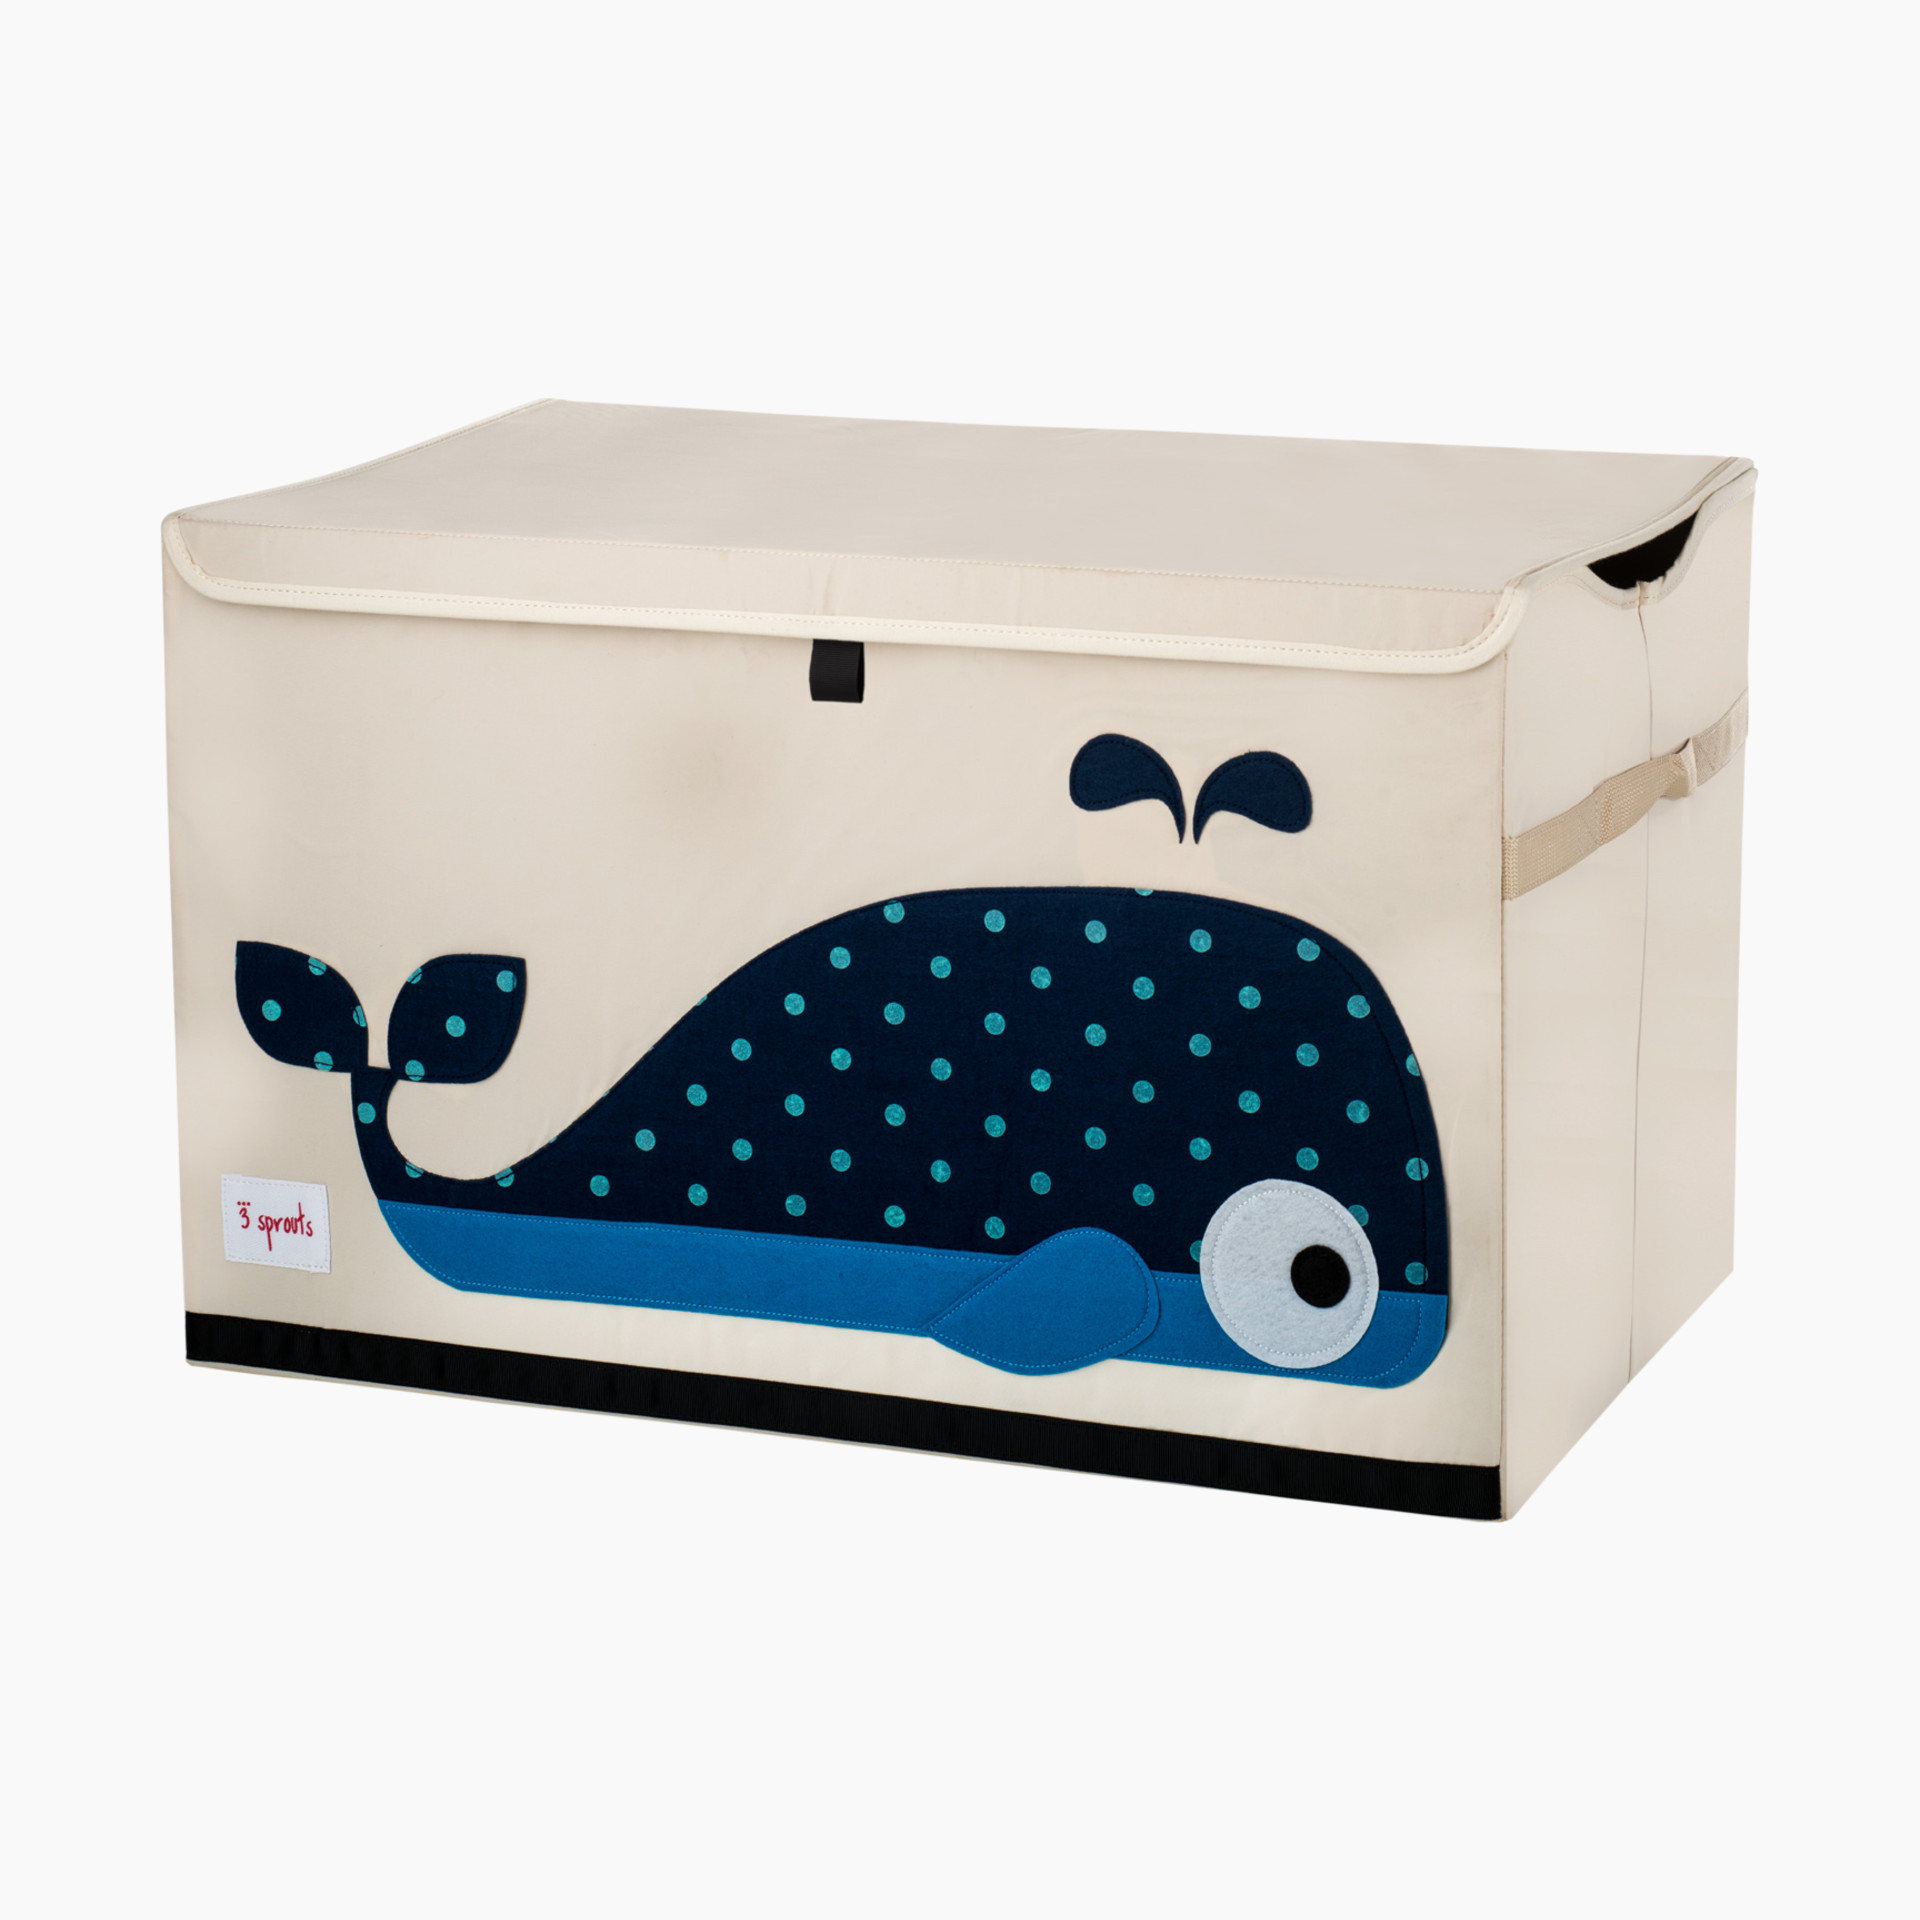 3 Sprouts Makes Cute, Durable Storage Boxes, Stroller Caddies & More